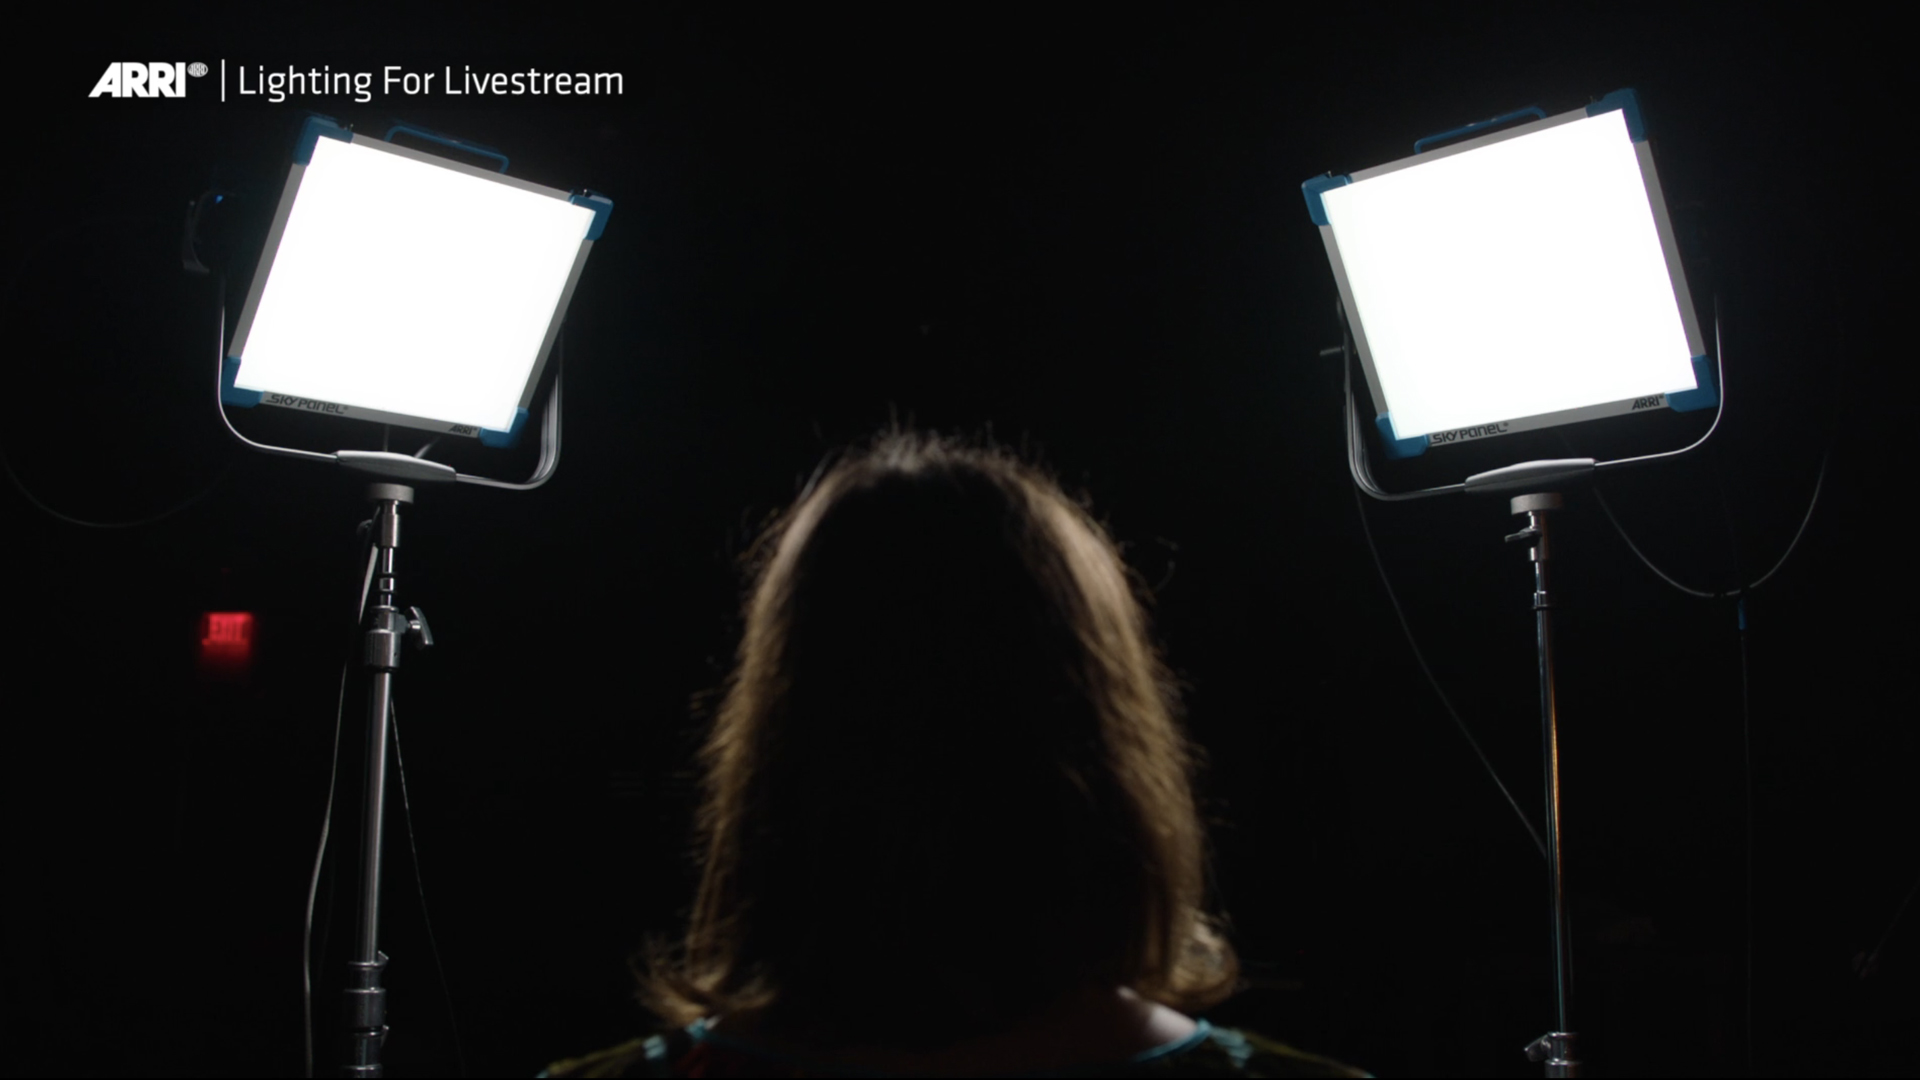 How to light faces for livestream - with only 2 SkyPanels